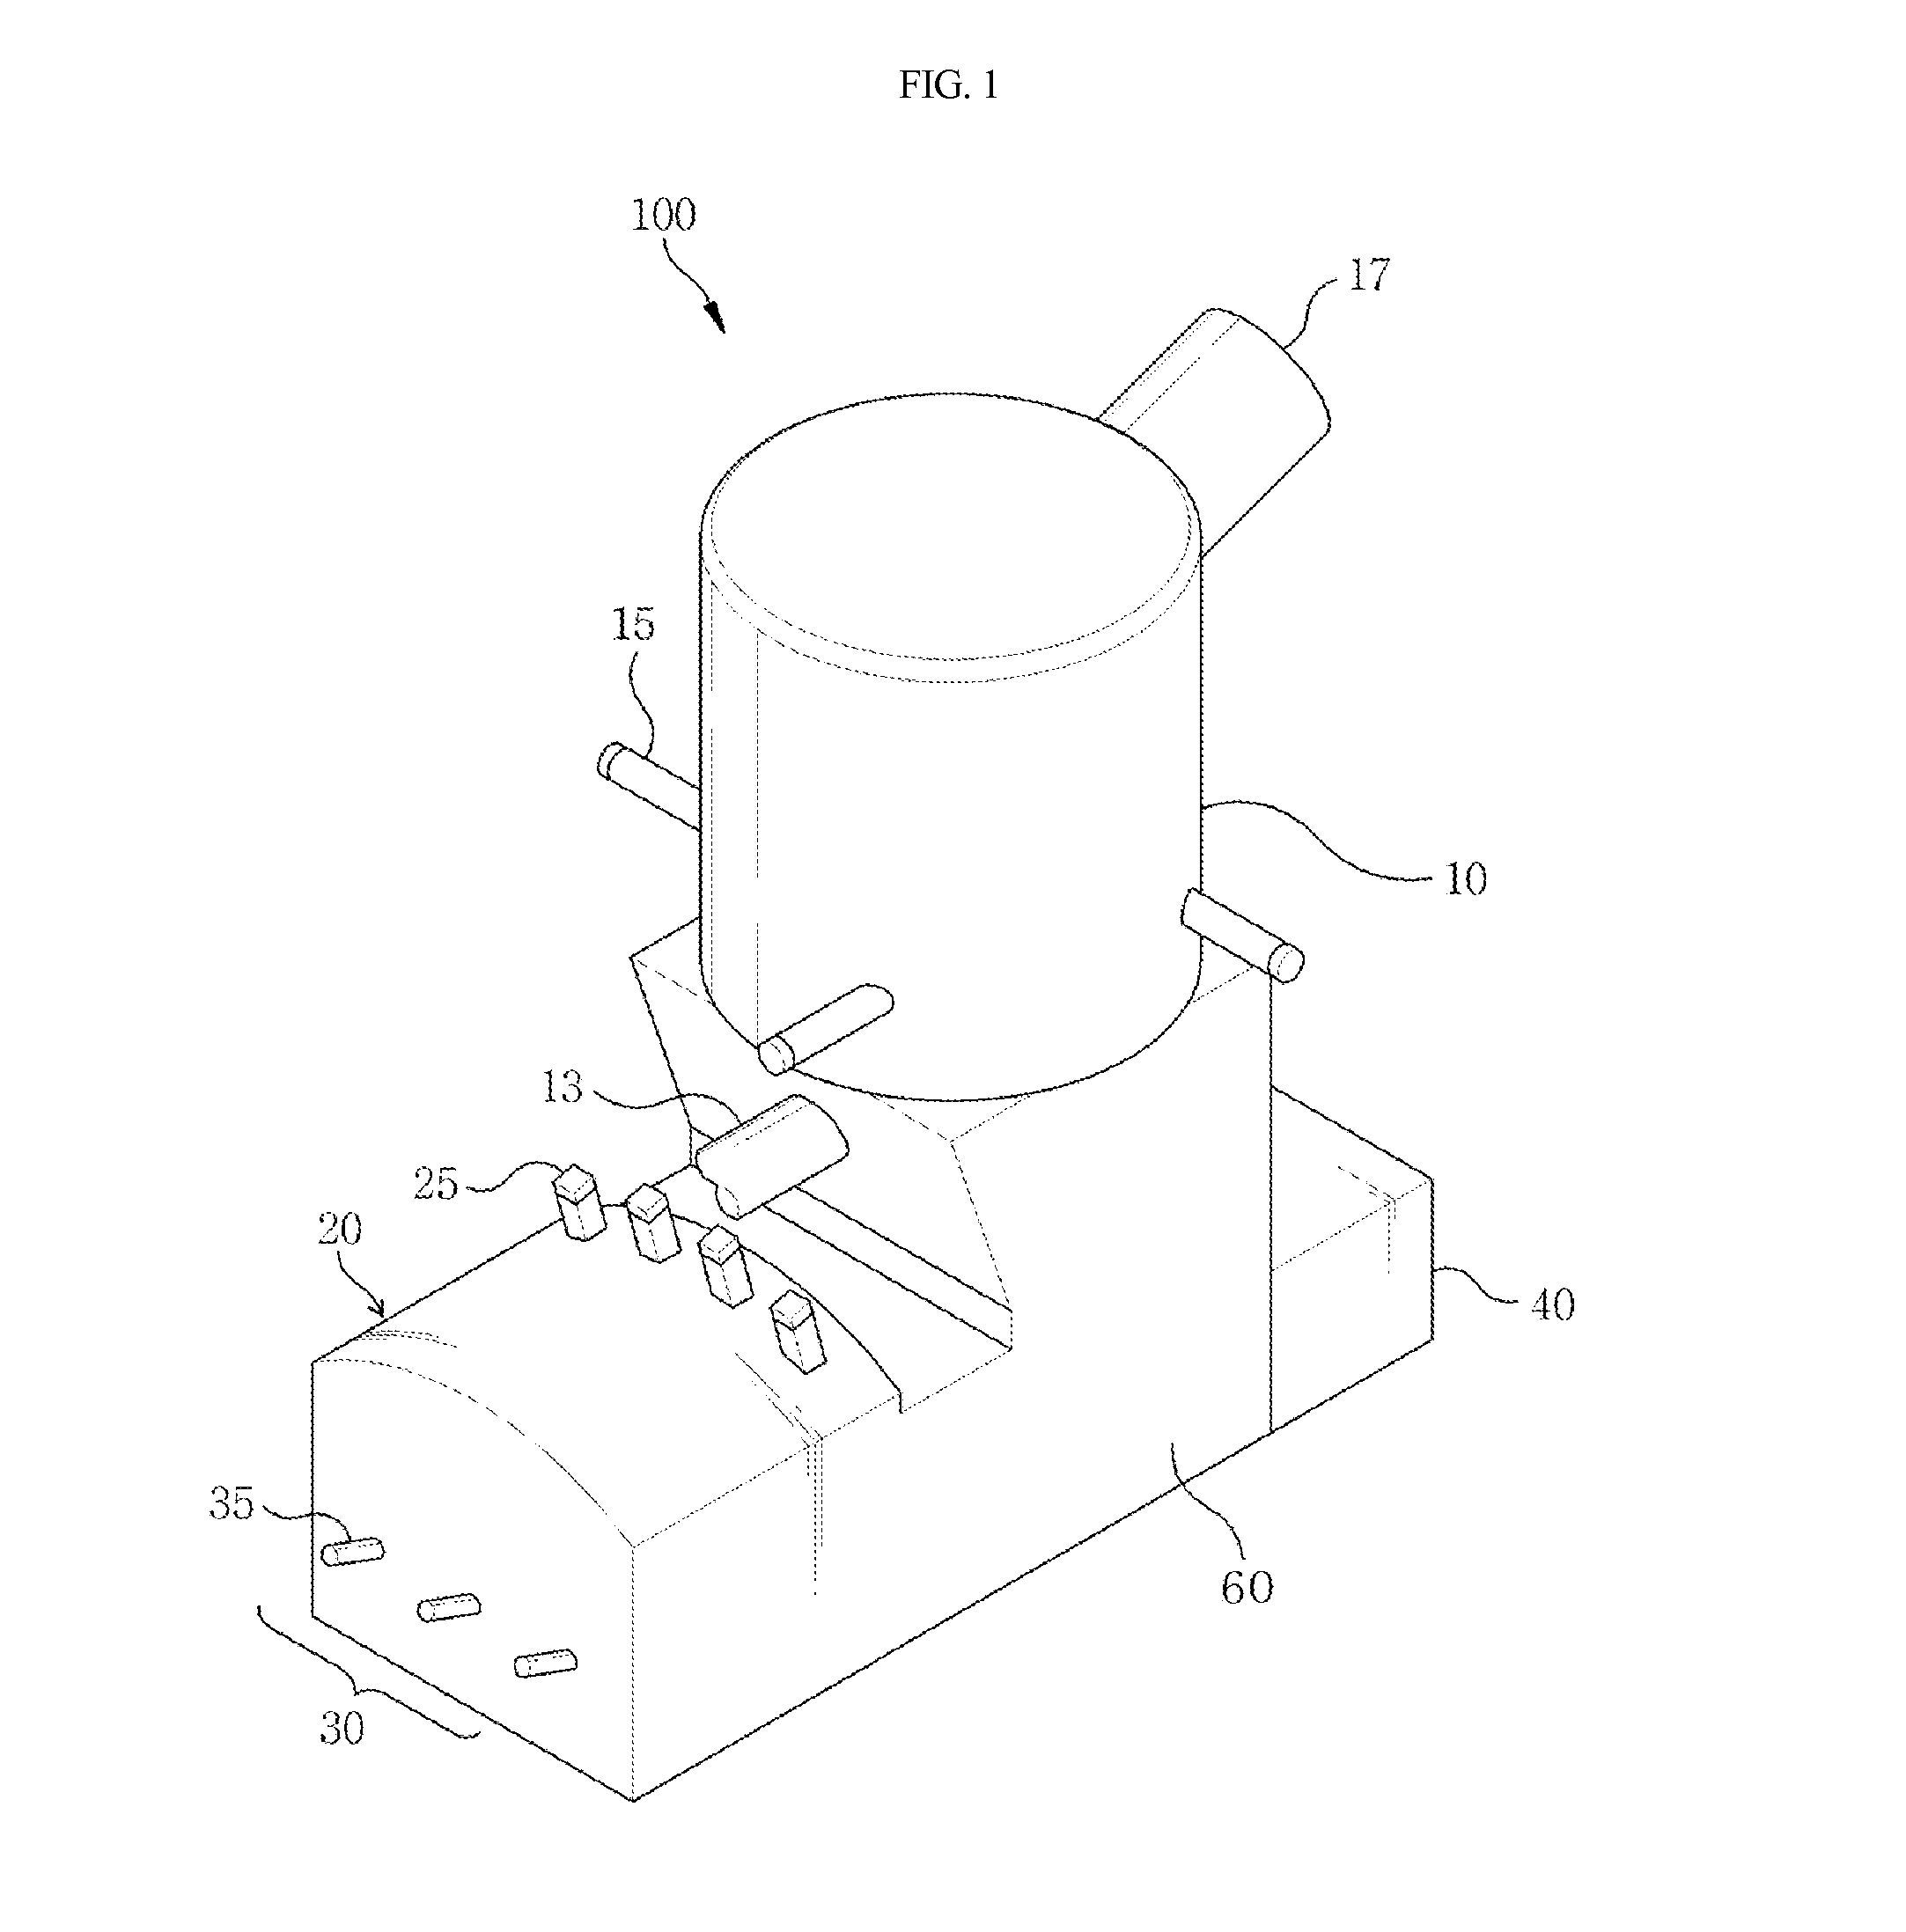 Gasification melting furnace and method for treating combustible material using the same